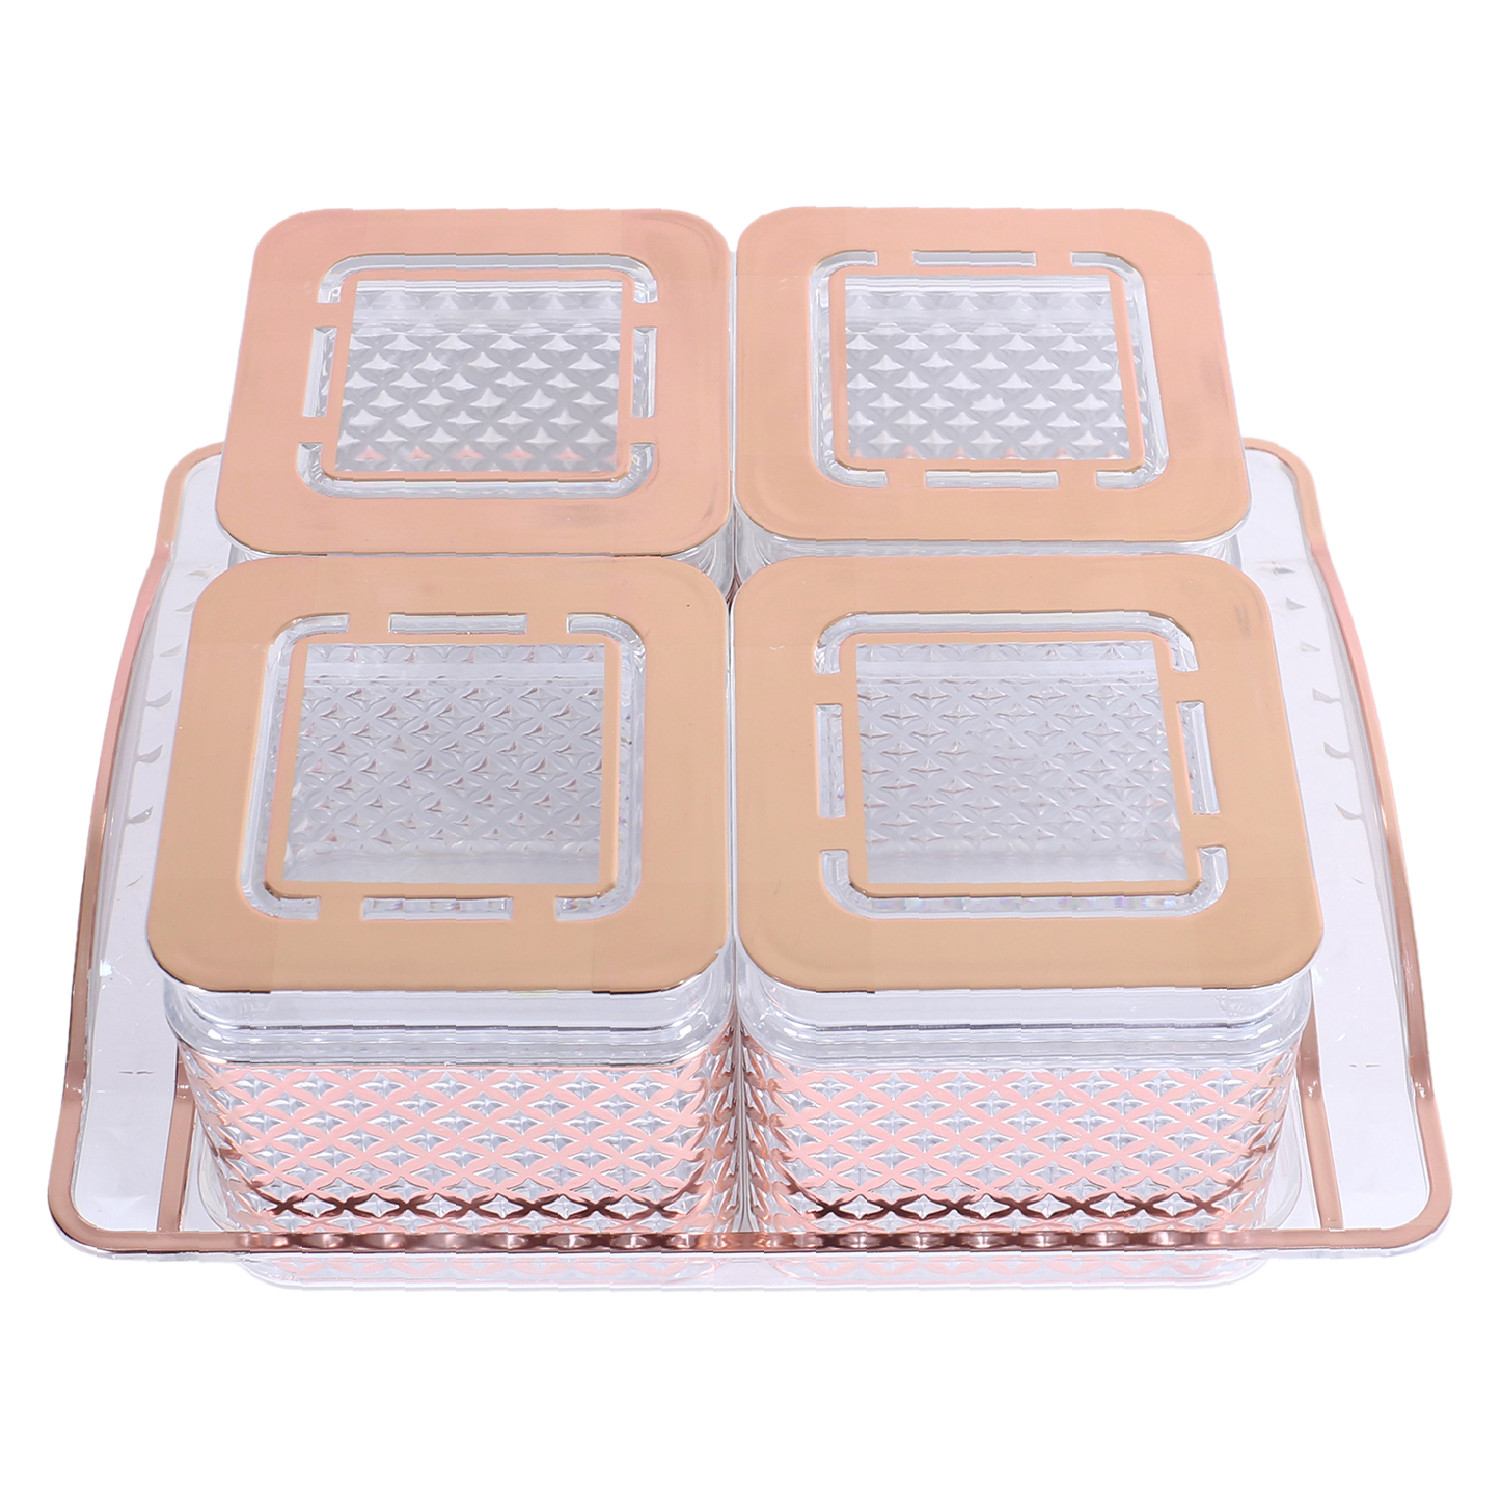 Kuber Industries 4 Containers & Tray Set|Unbreakable Plastic Snackers,Cookies,Nuts Serving Tray|Airtight Containers with Lid,400 ml (Peach)